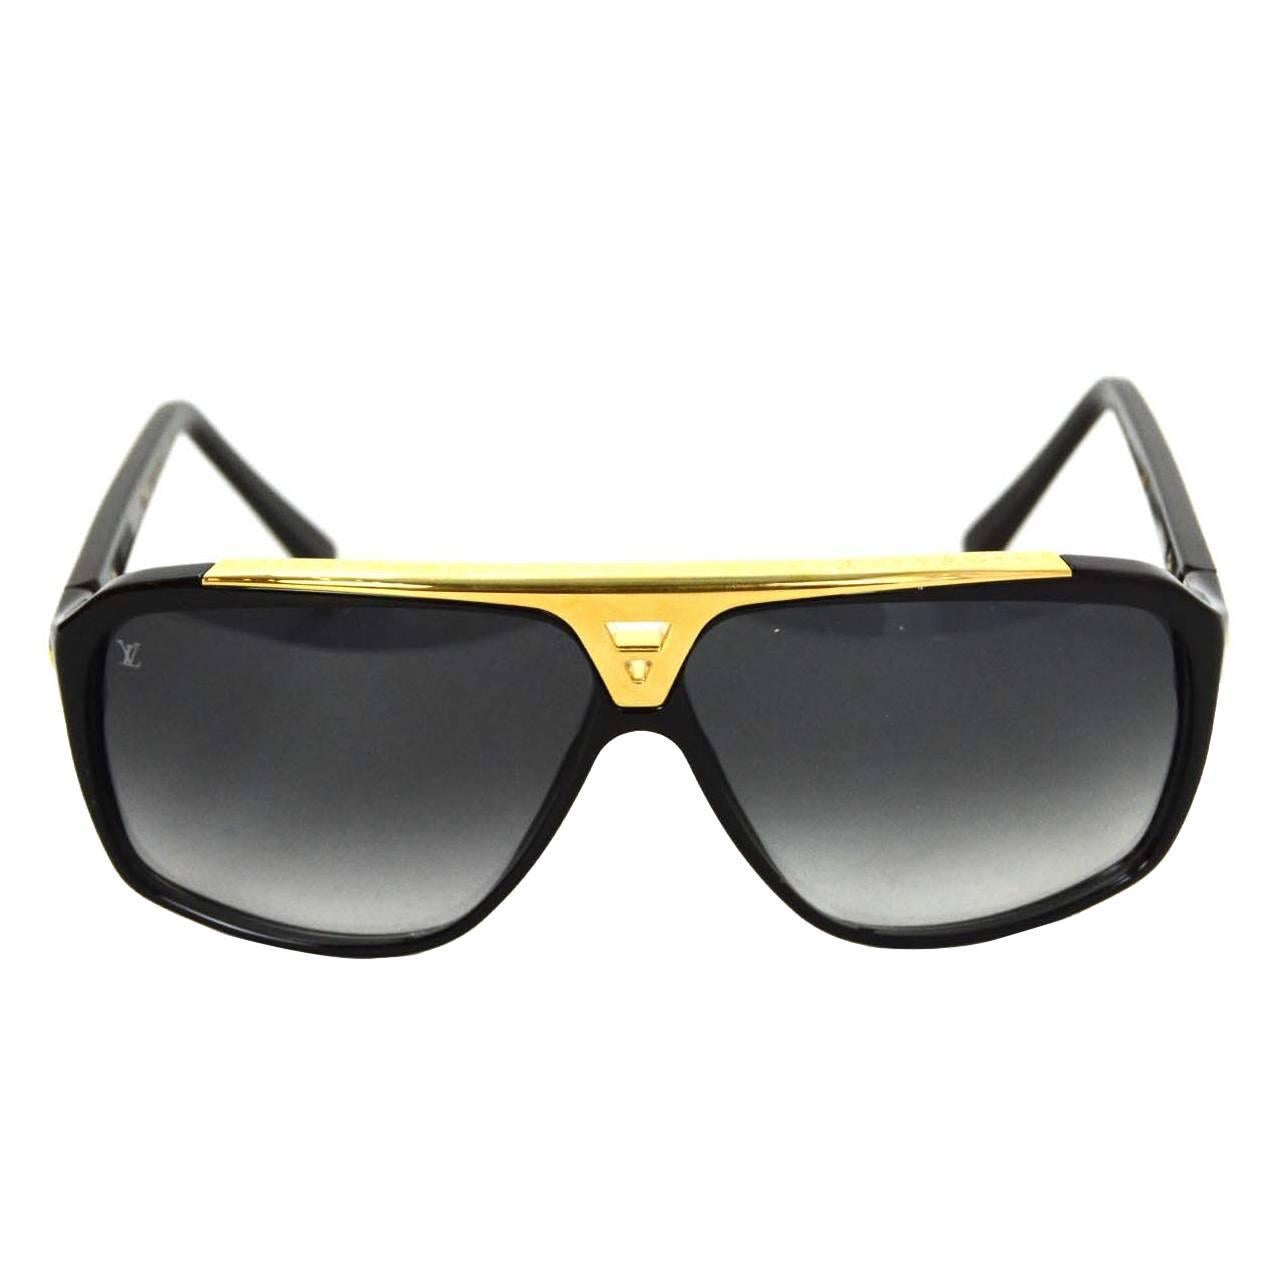 Louis Vuitton Black and Gold-tone Evidence Sunglasses Rt $760